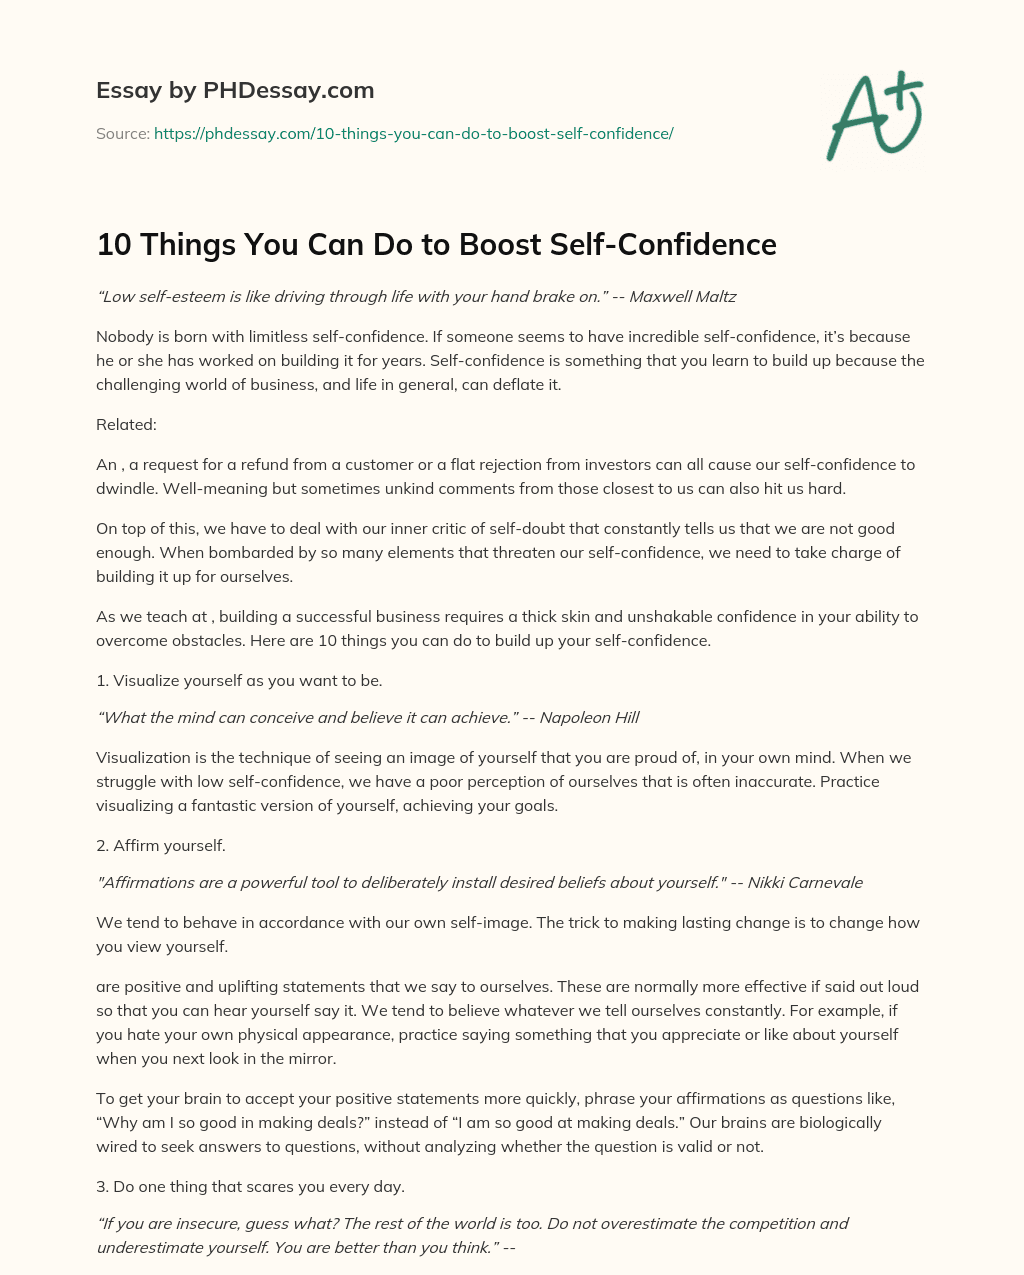 10 Things You Can Do to Boost Self-Confidence essay